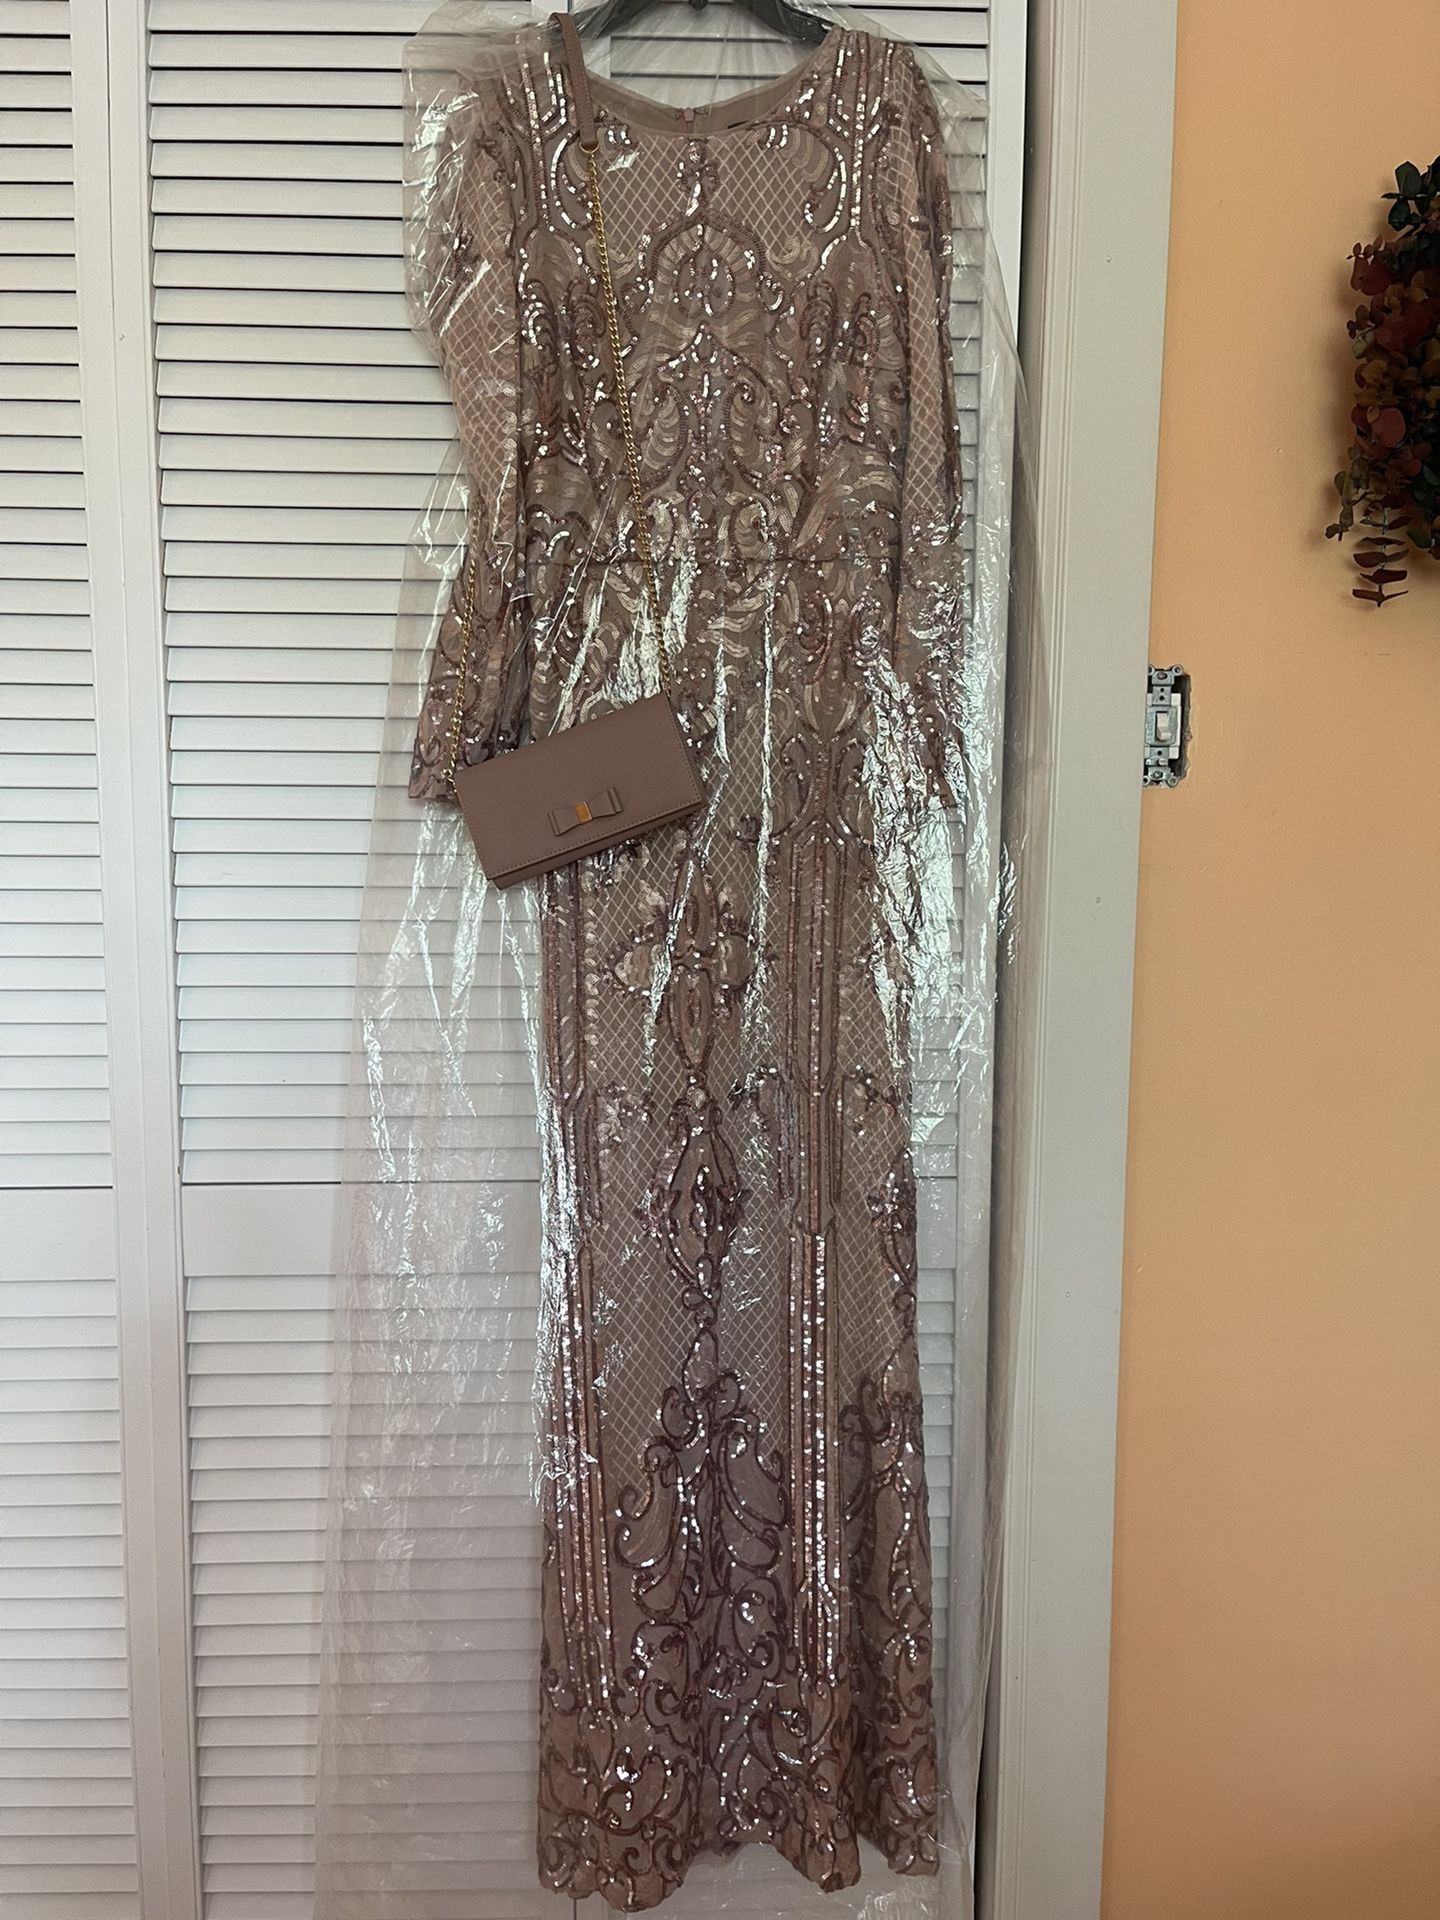 Dress For Wedding Purse Included Size 8 From Macys 